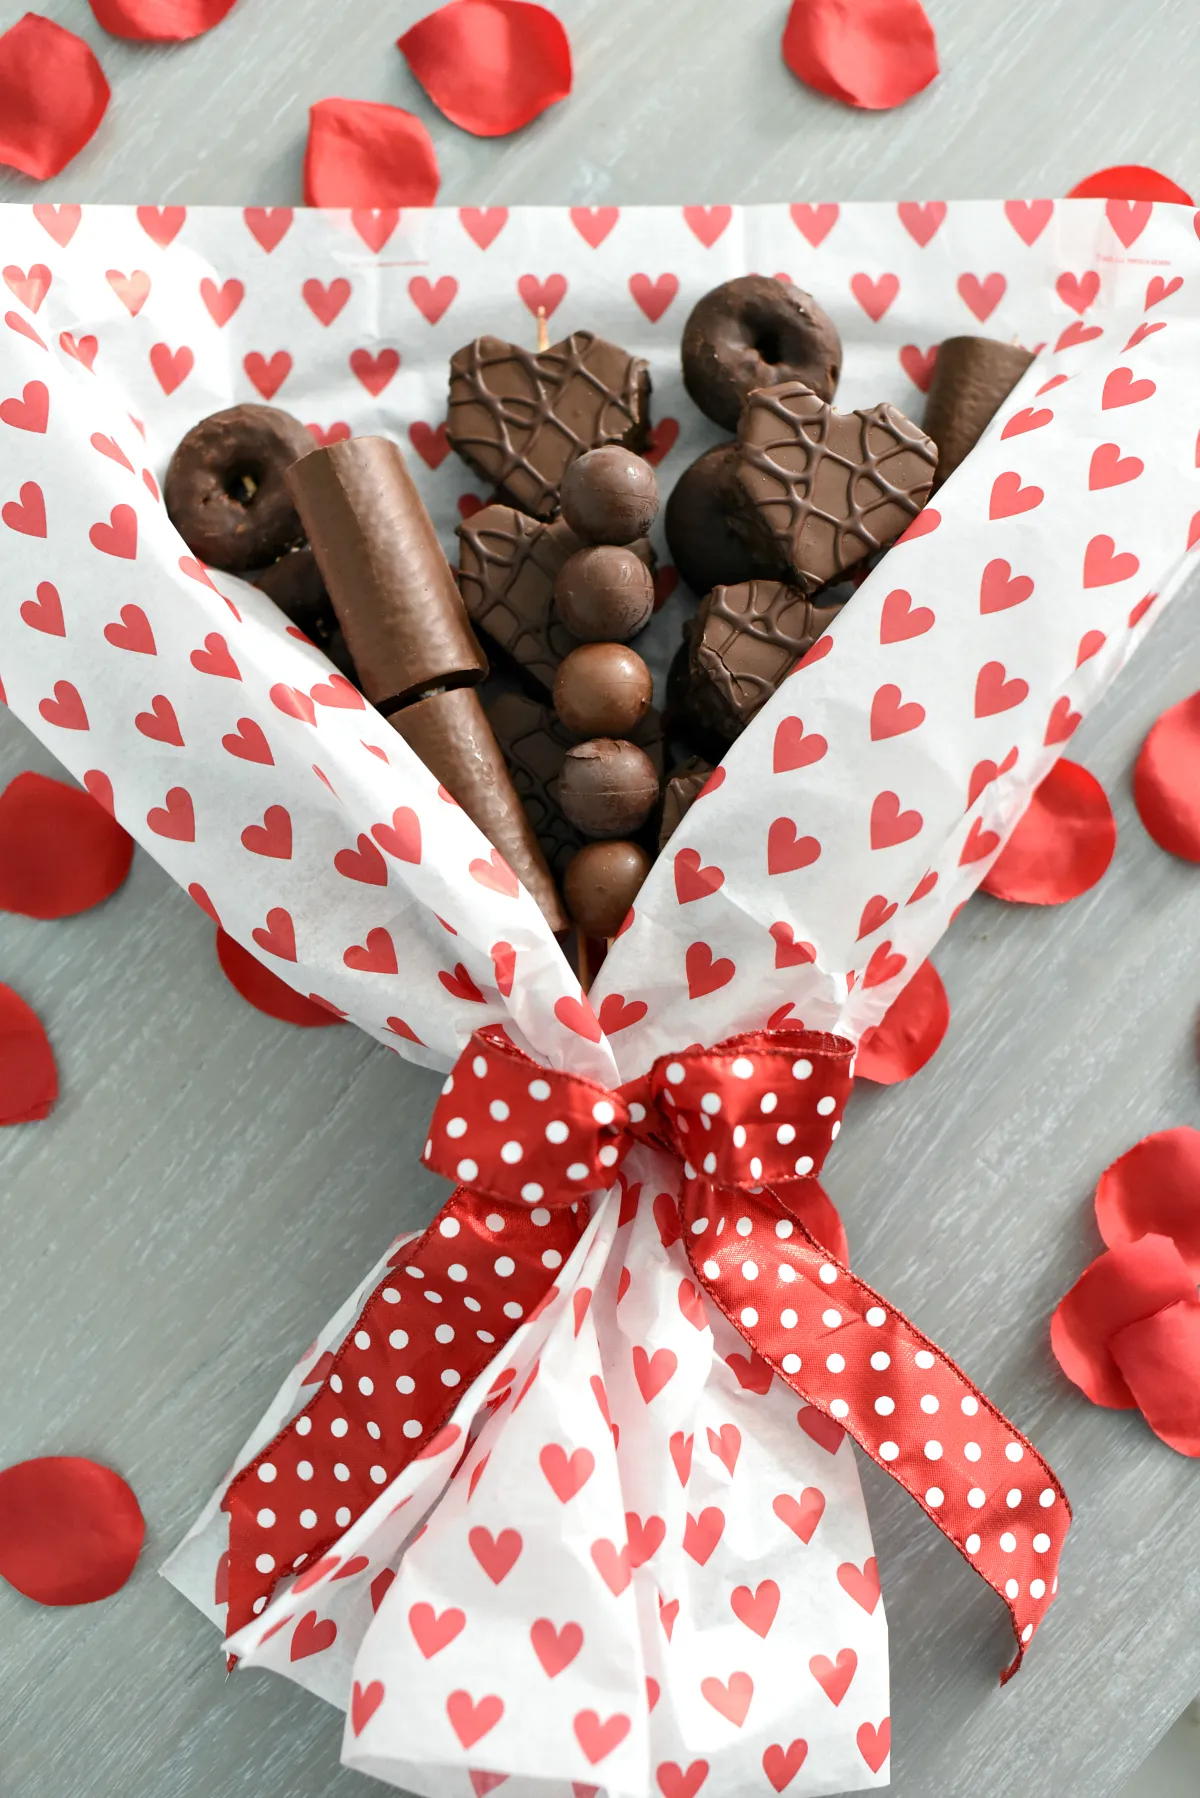 Easy Chocolate Bouquet: